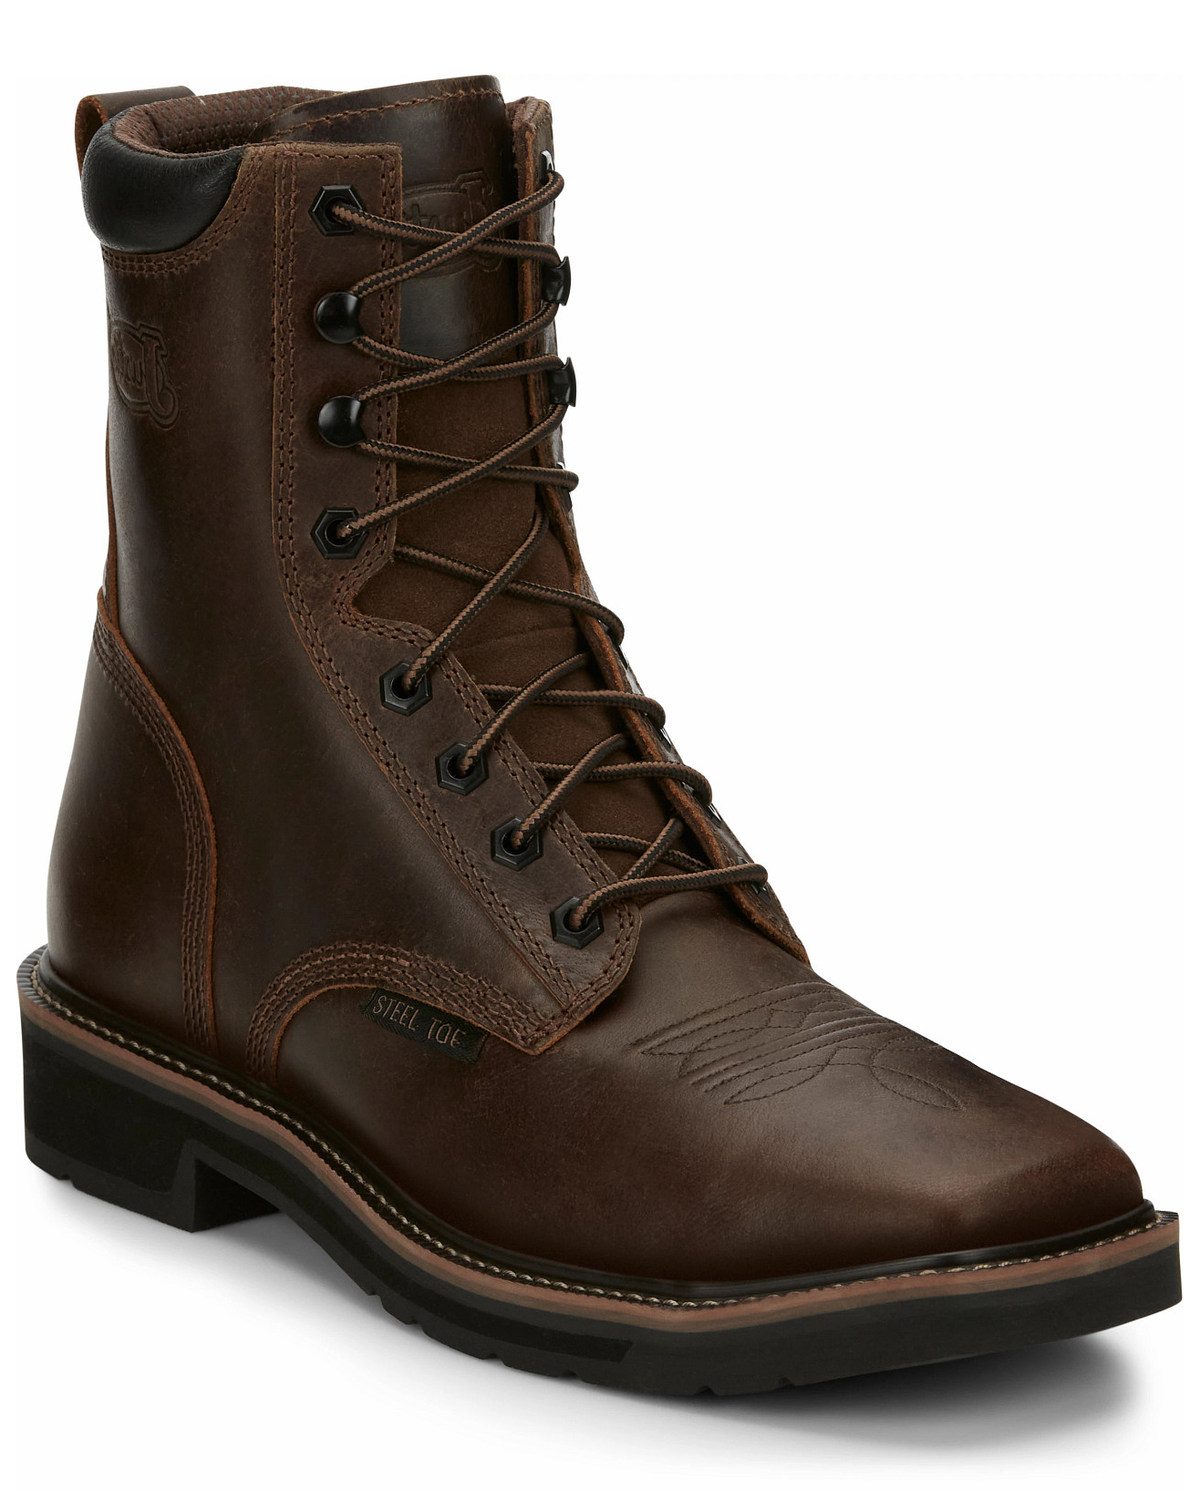 Justin Men's Pulley Lace-Up Work Boots - Steel Toe